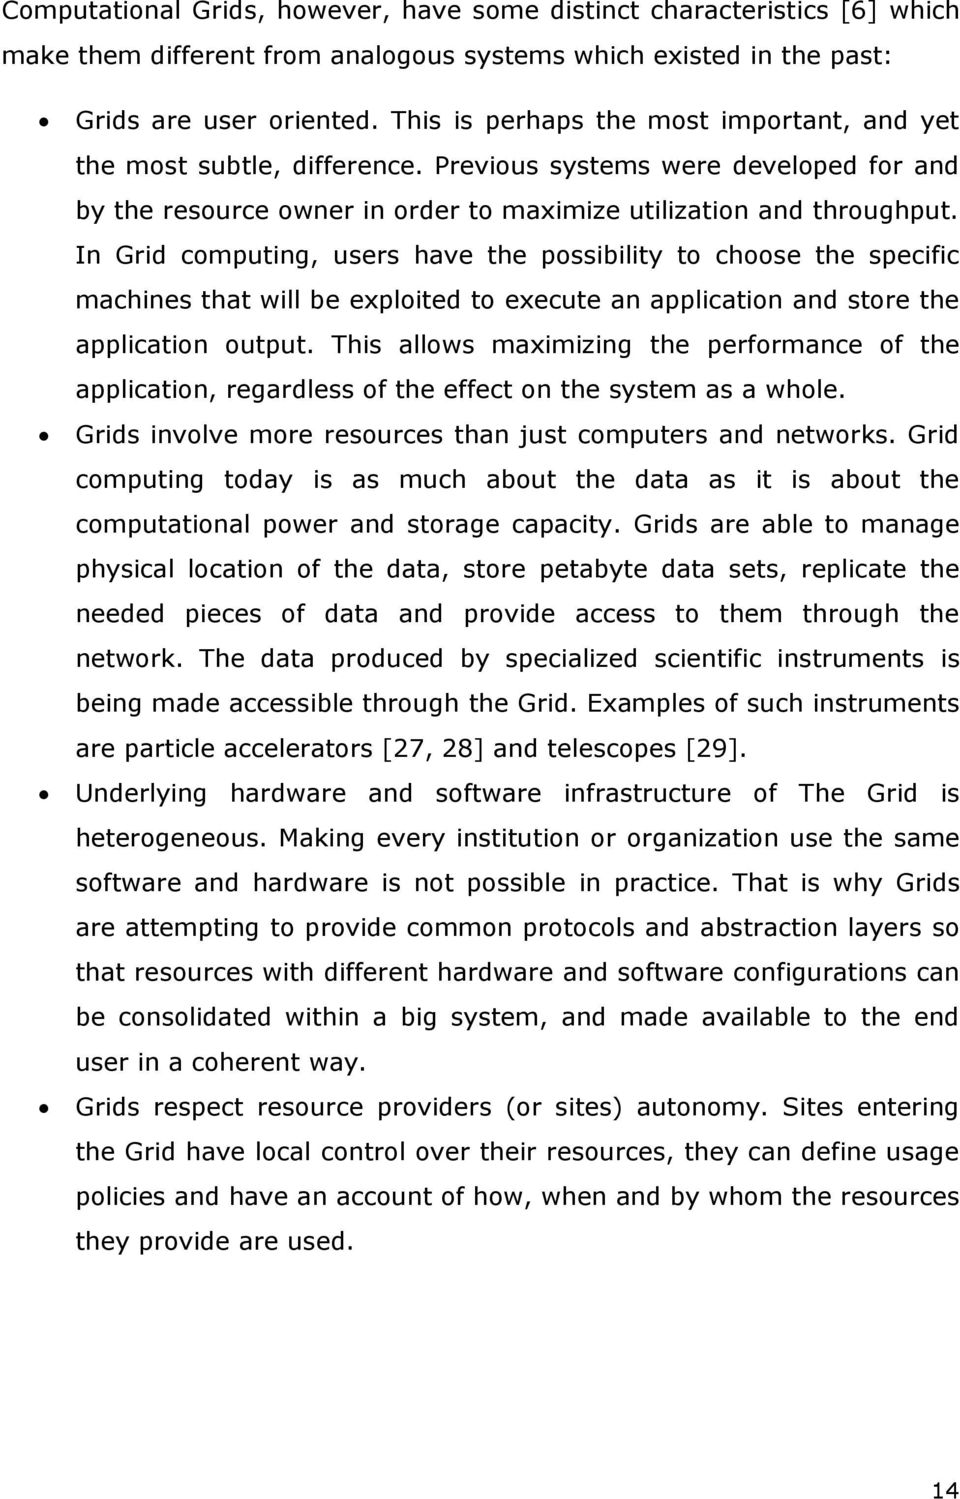 In Grid computing, users have the possibility to choose the specific machines that will be exploited to execute an application and store the application output.